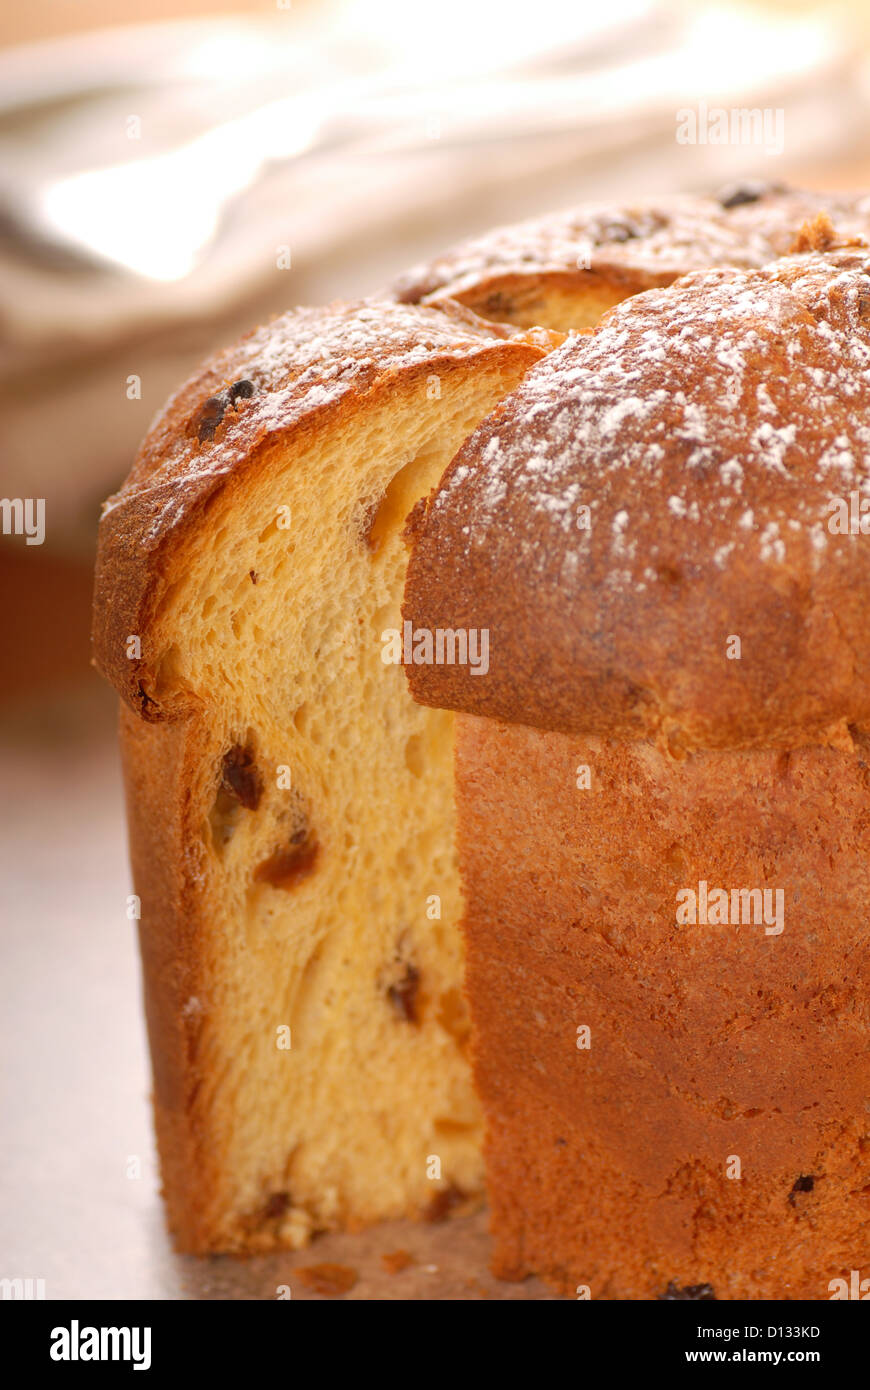 Freshly baked Italian Panettone Christmas bread with a slice cut out Stock Photo